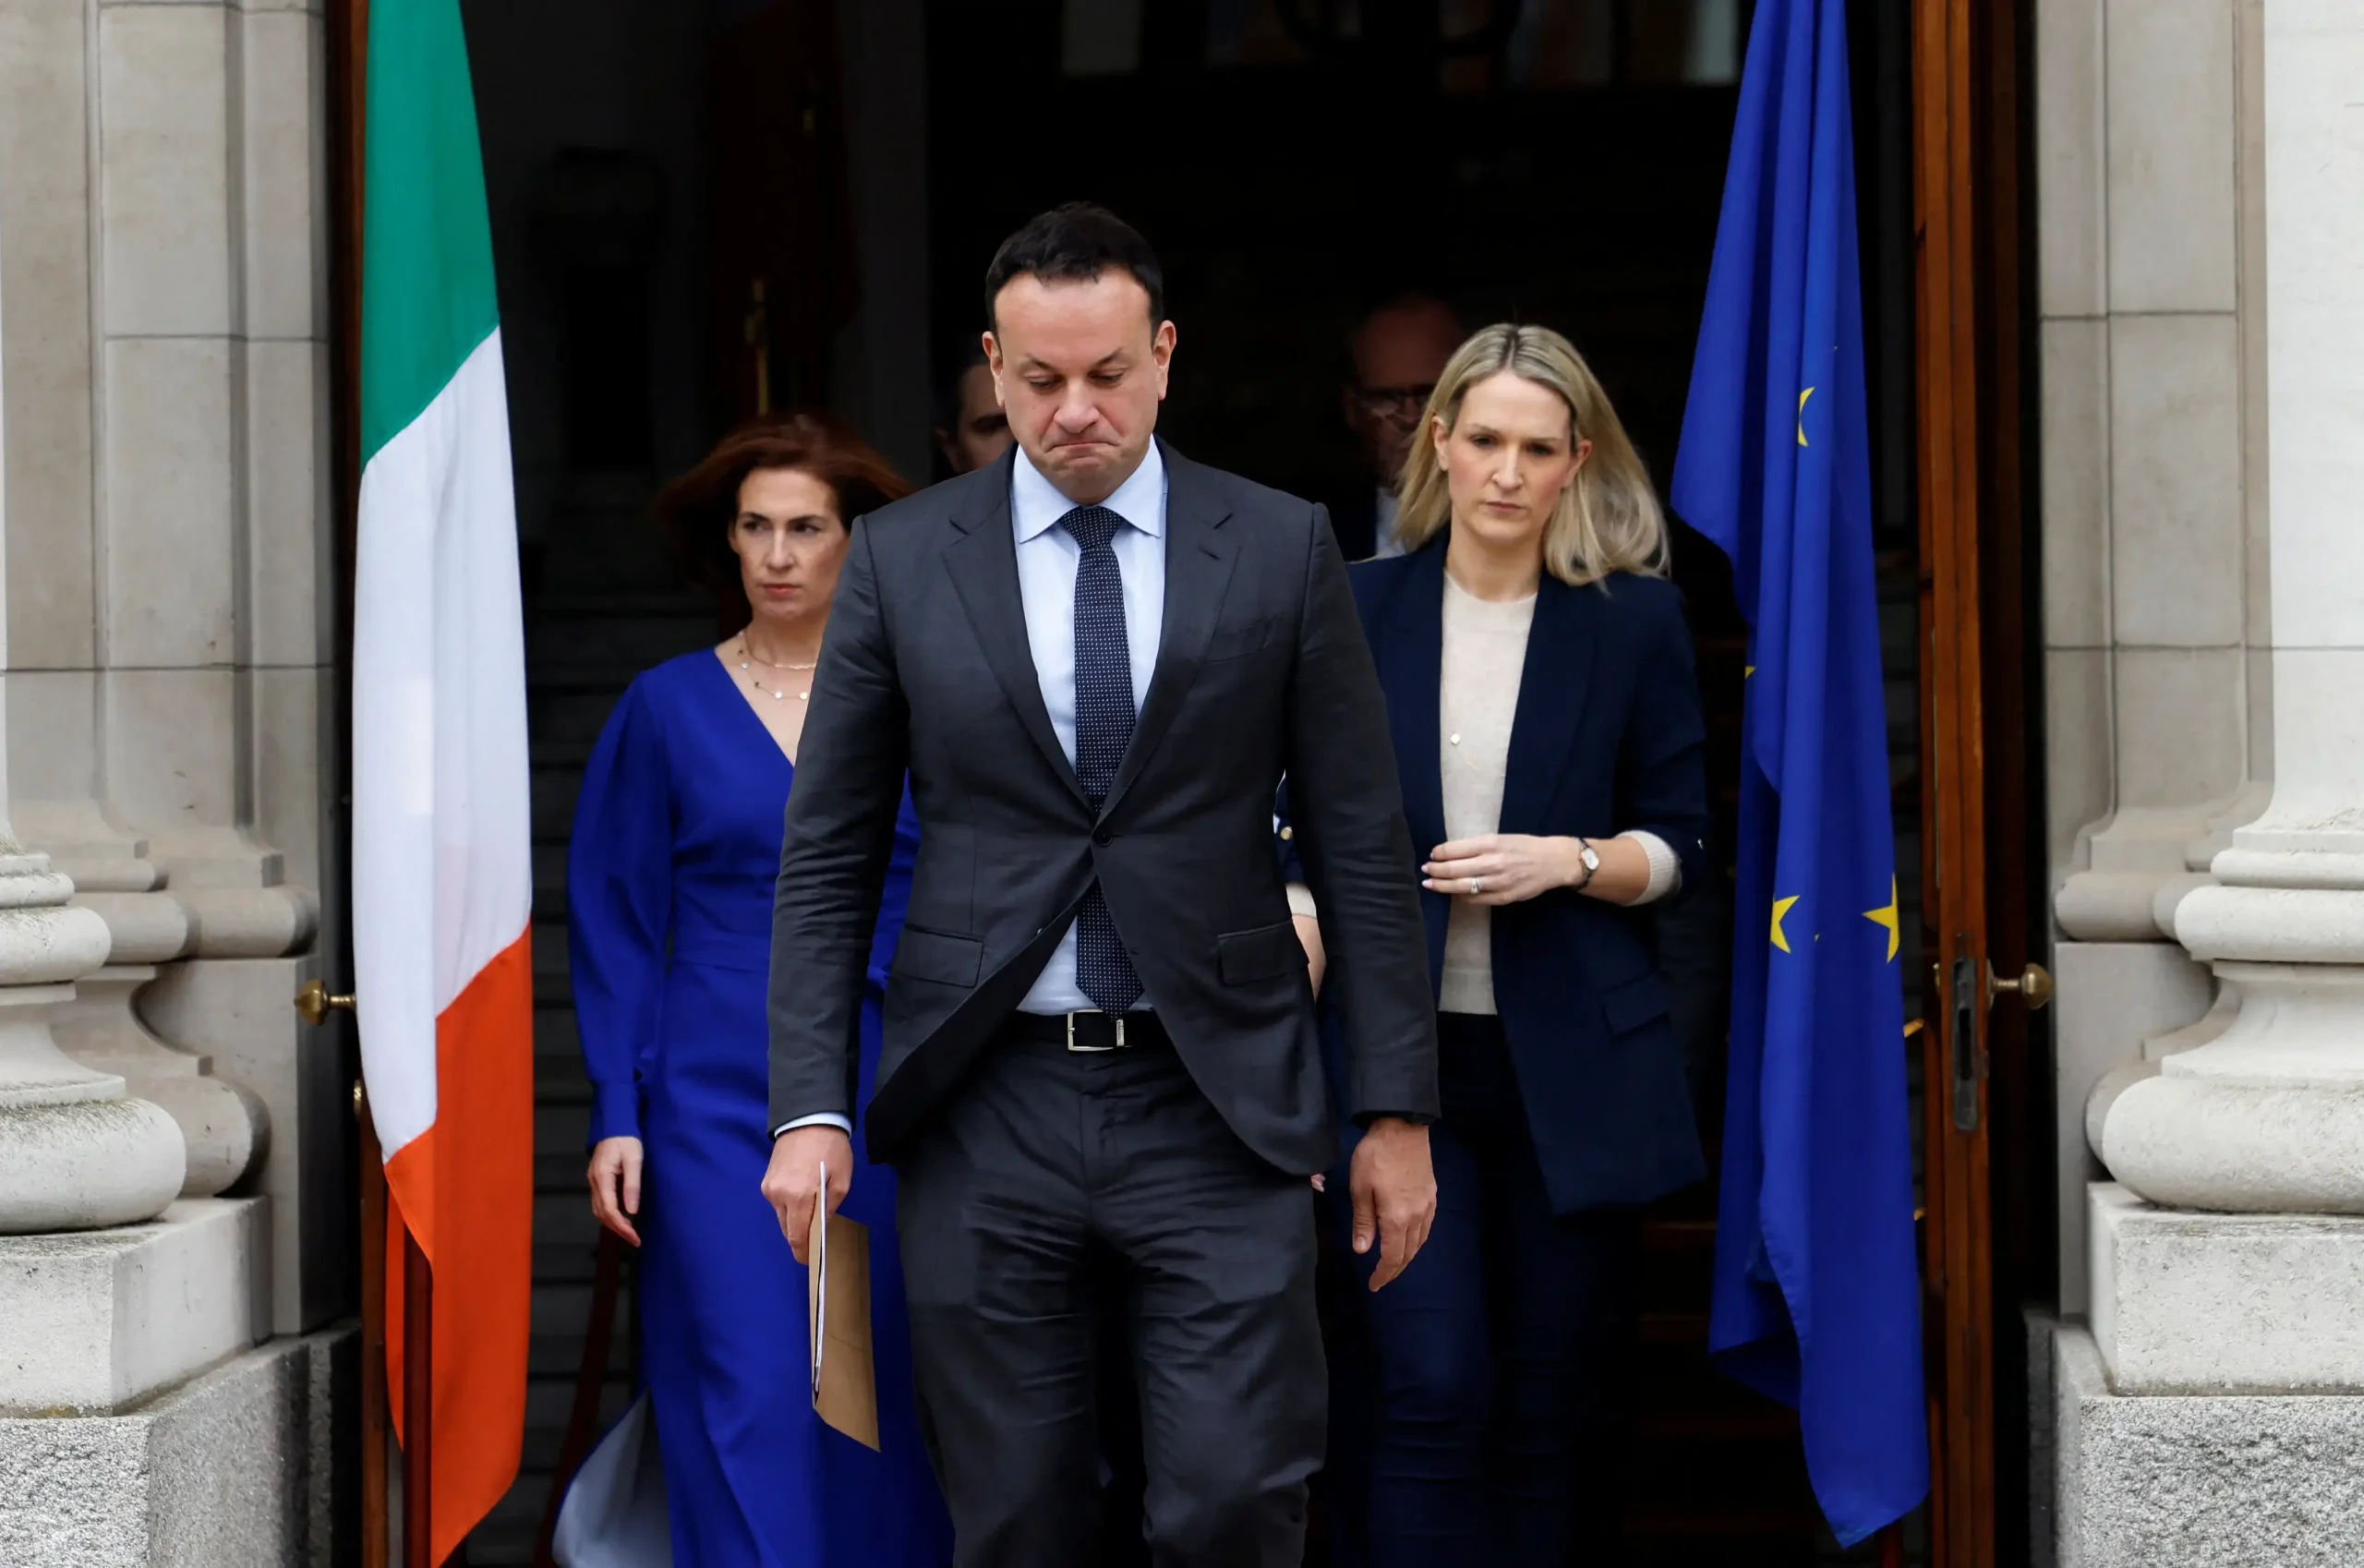 Leo Varadkar Announced His Decision To Step Down As The Leader Of Ireland On Wednesday